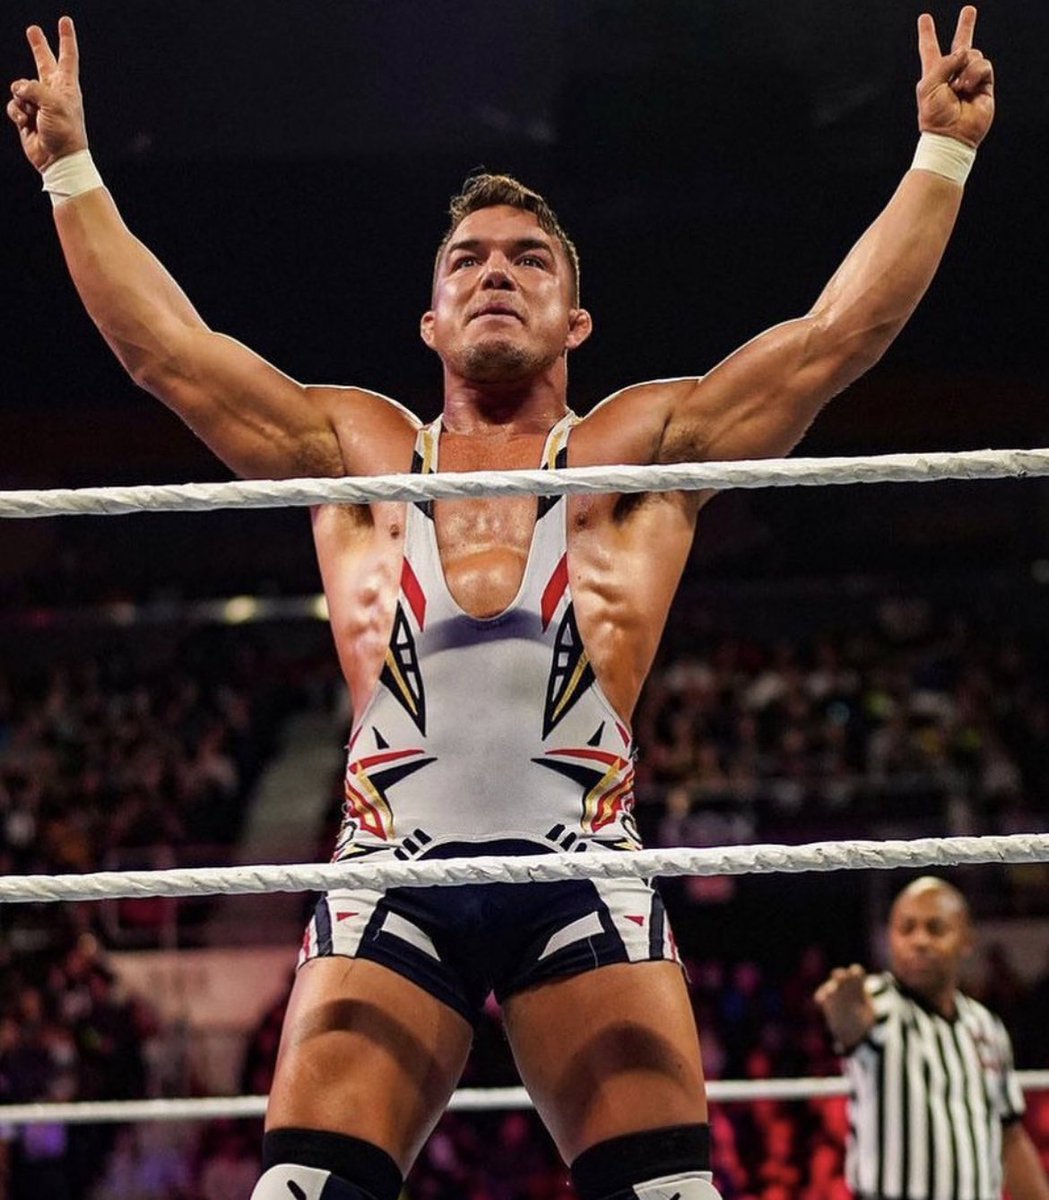 New Storyline for Chad Gable. Absolute W

(starts tonight) #WWERaw